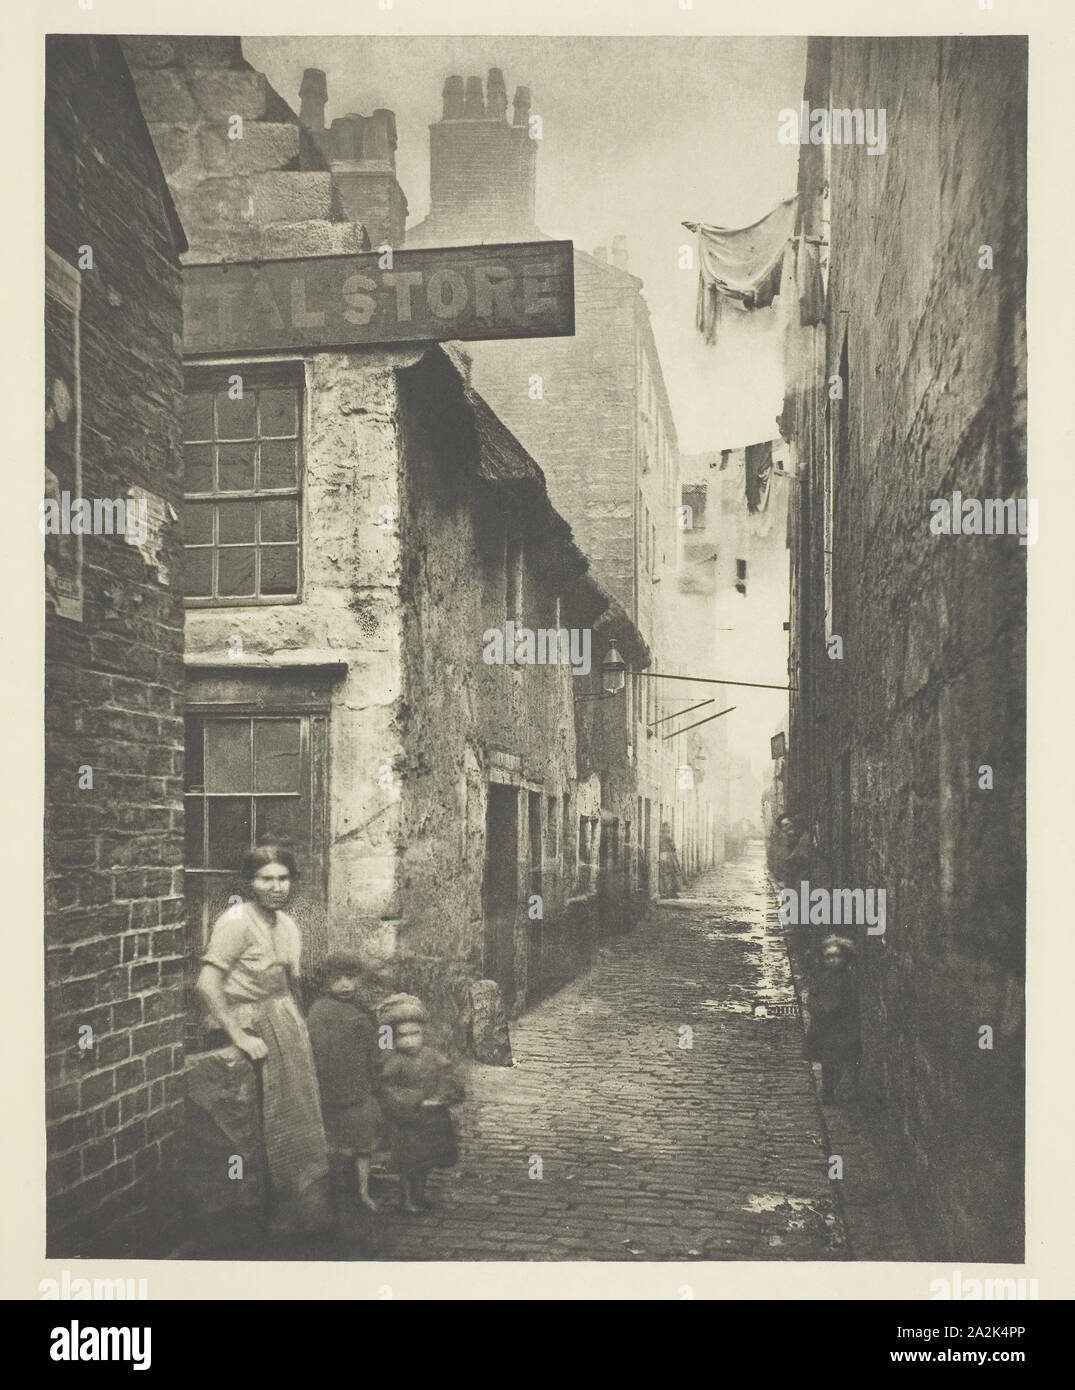 Old Vennel off High Street, 1868, Thomas Annan, Scottish, 1829–1887, Scotland, Photogravure, plate 2 from the book 'The Old Closes & Streets of Glasgow' (1900), 21.6 x 17.3 cm (image), 38.2 x 27.3 cm (paper Stock Photo